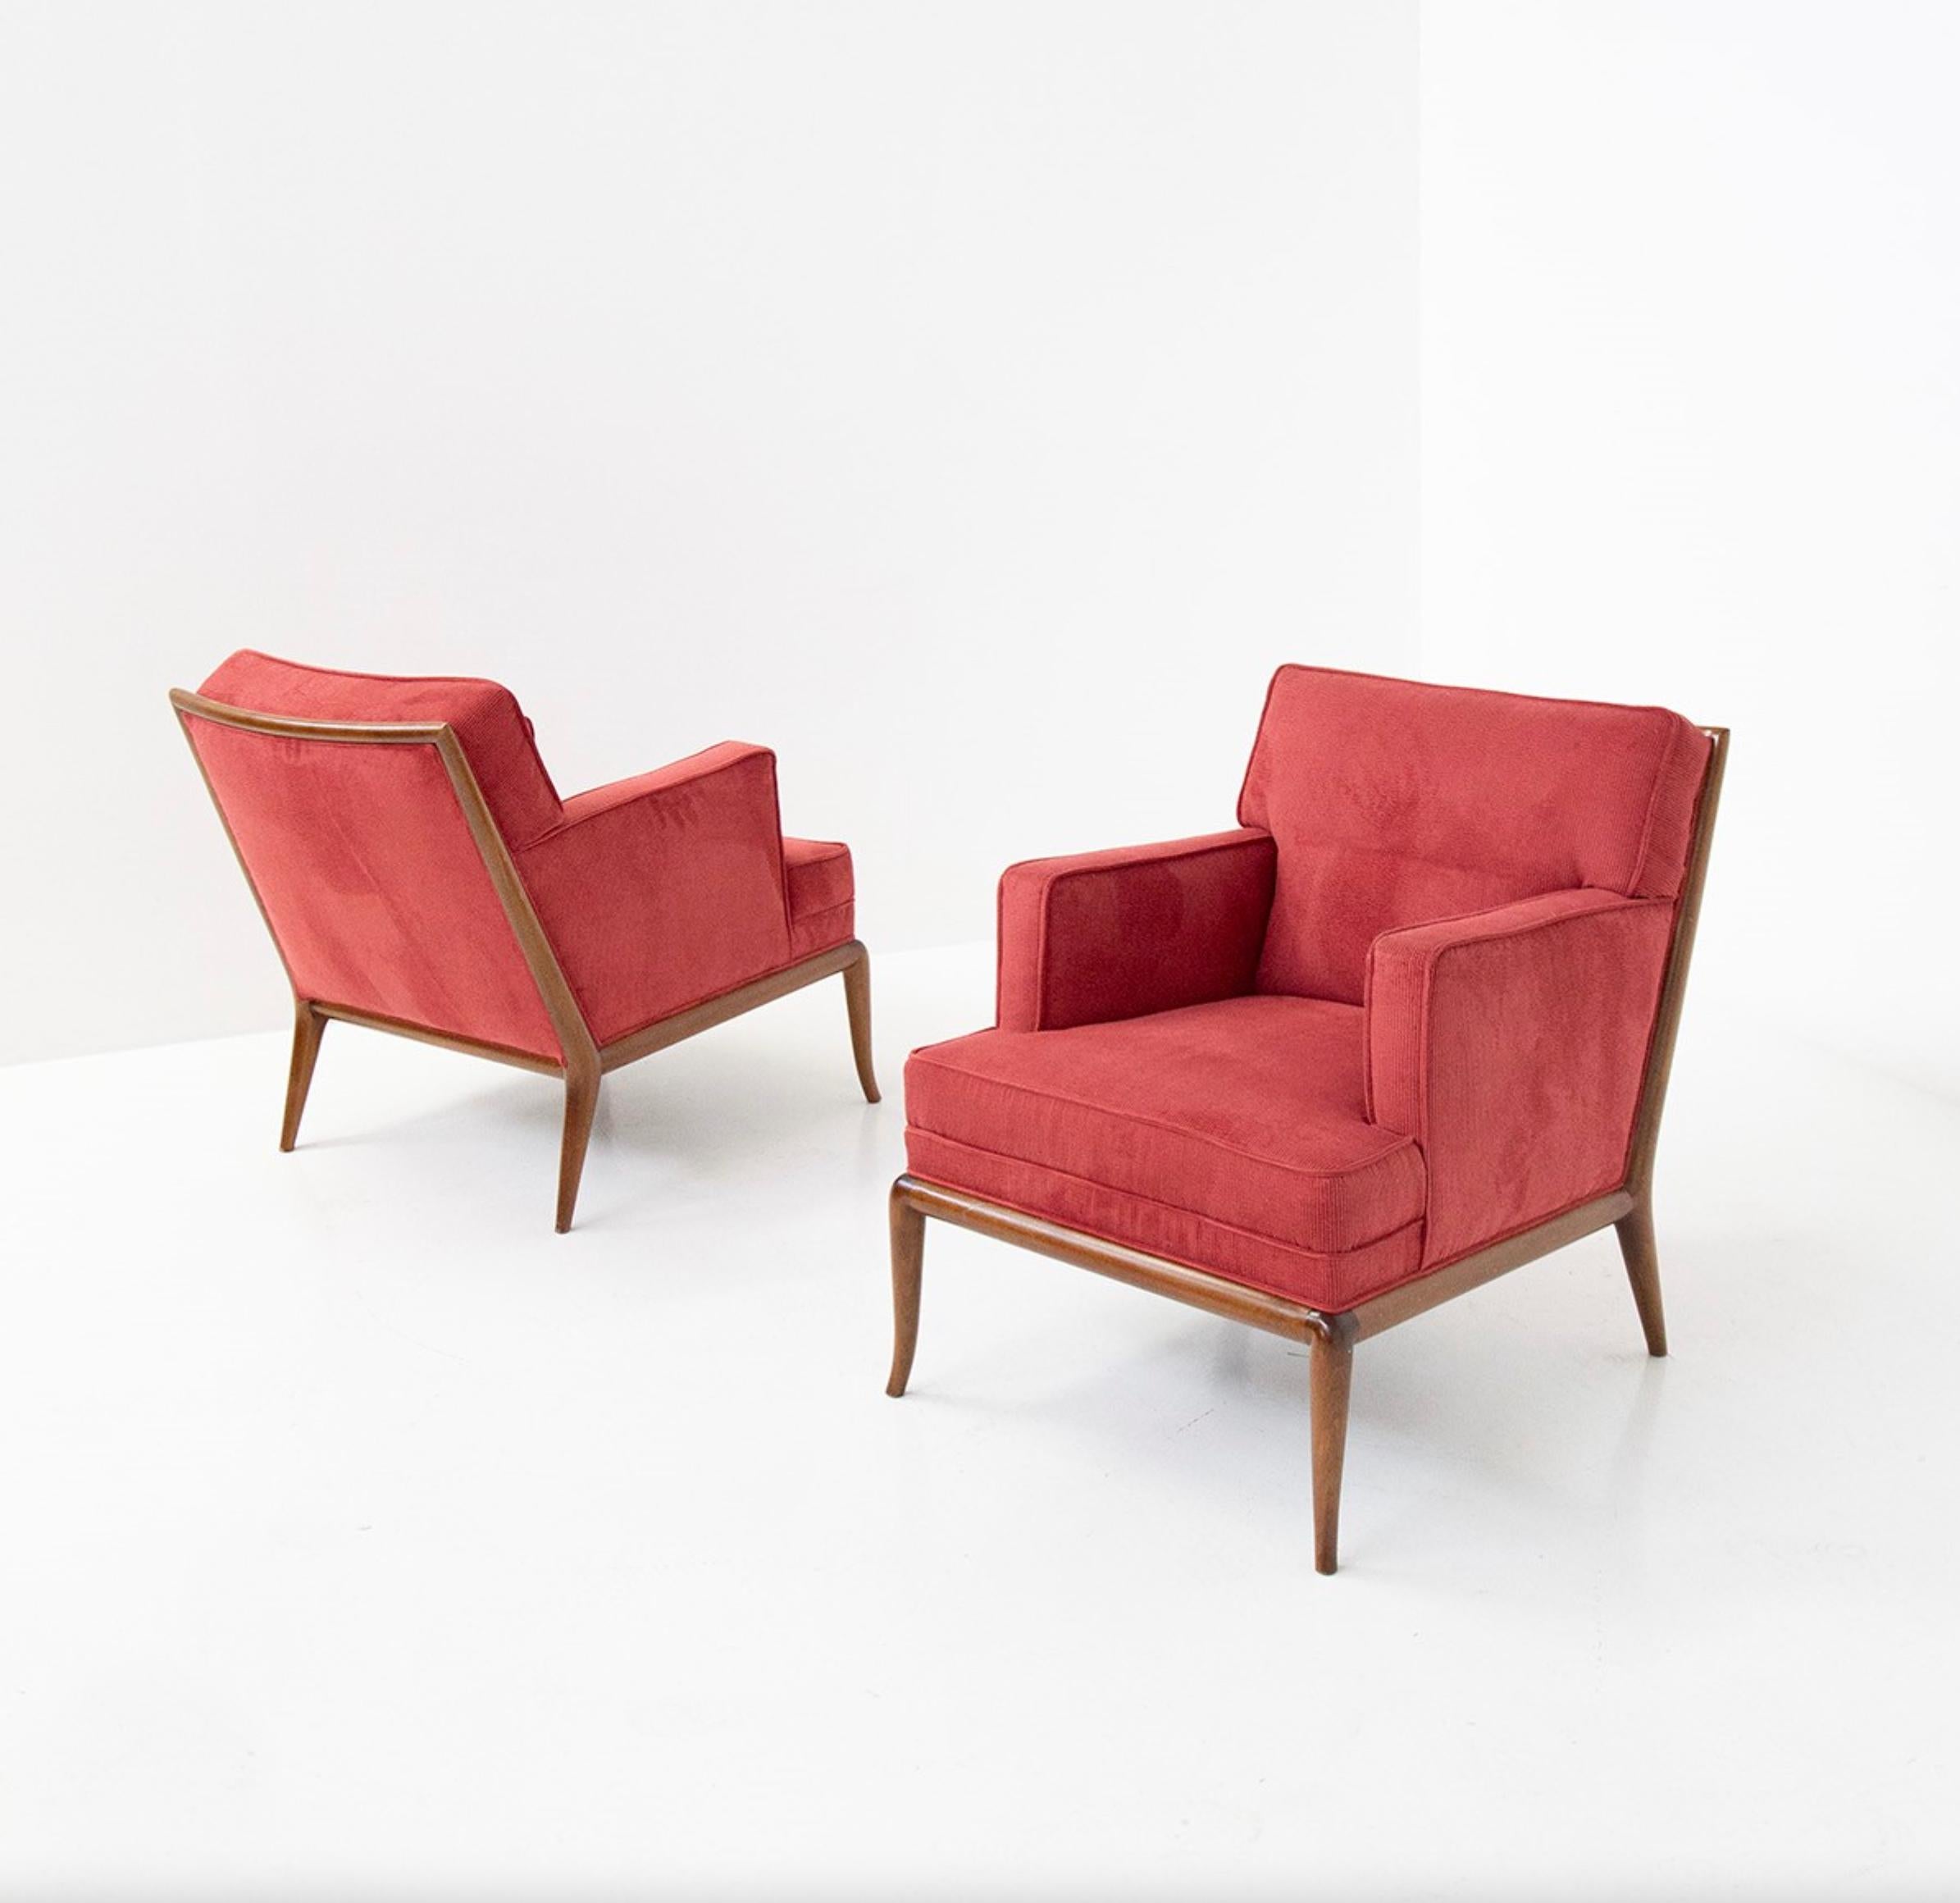 Pair of American midcentury lounge / armchairs with velvet red fabric upholstery with removable seat cushions and a walnut frame, made in the USA for WIDDICOMB Furniture around 1950
Good condition
Price for the pair.